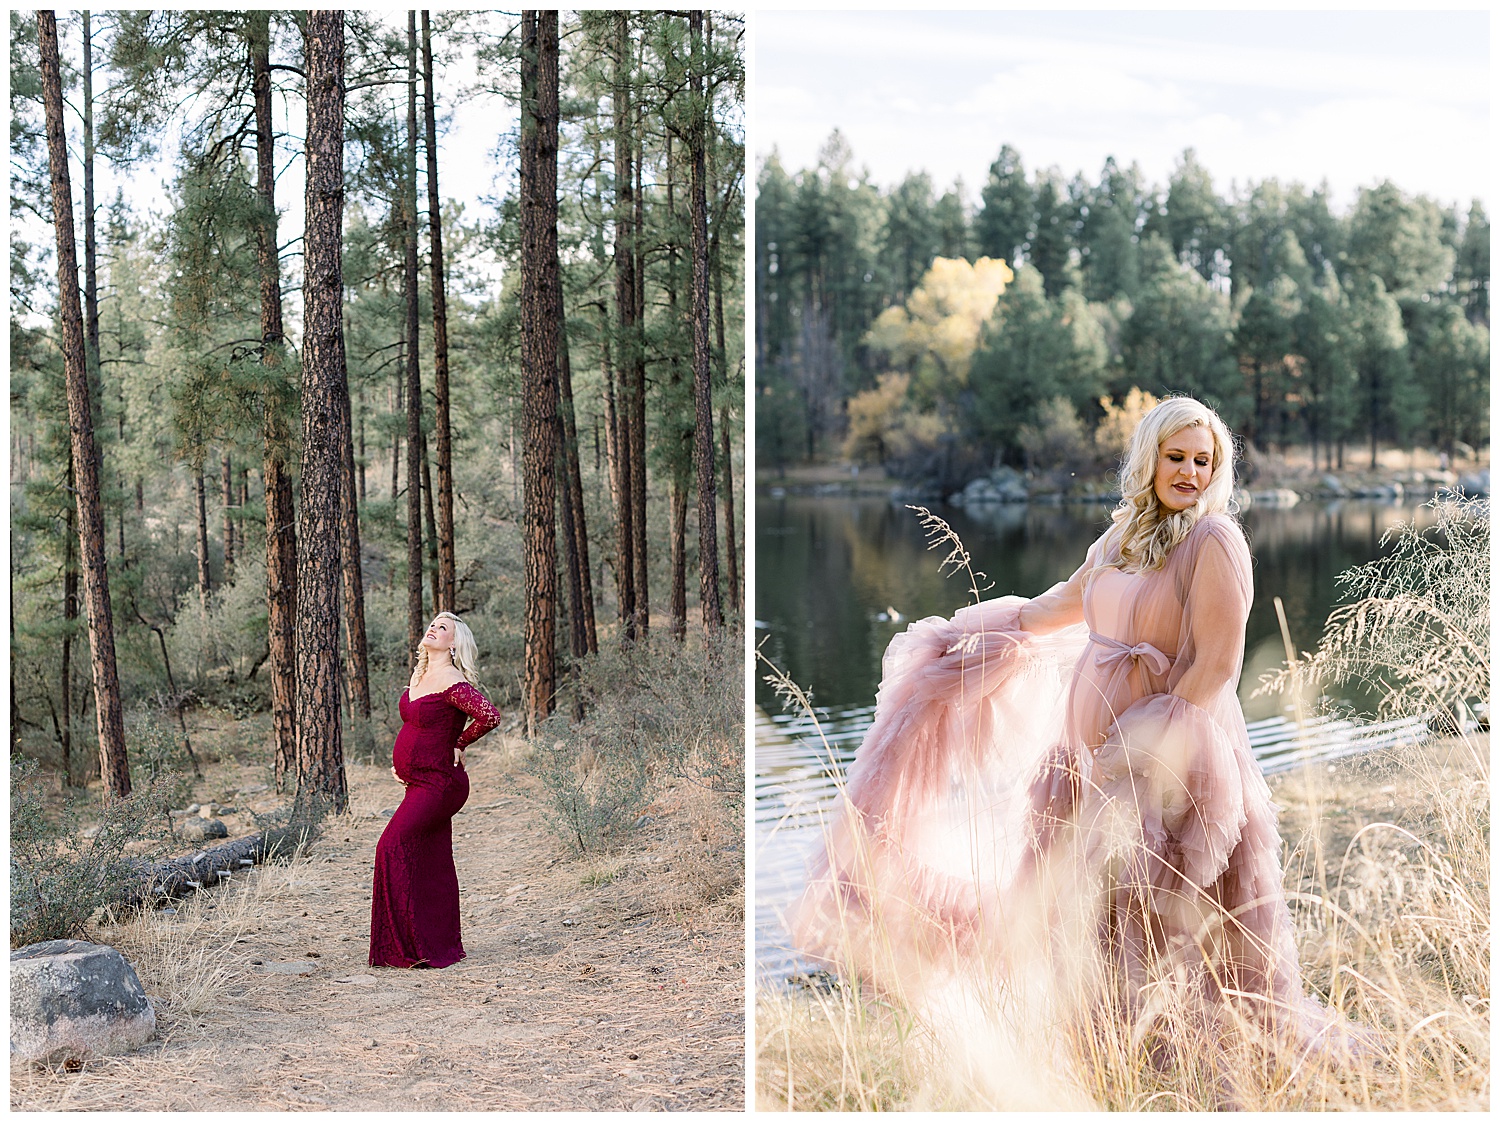 Blush and deep red gowns for forest maternity session in Prescott Arizona